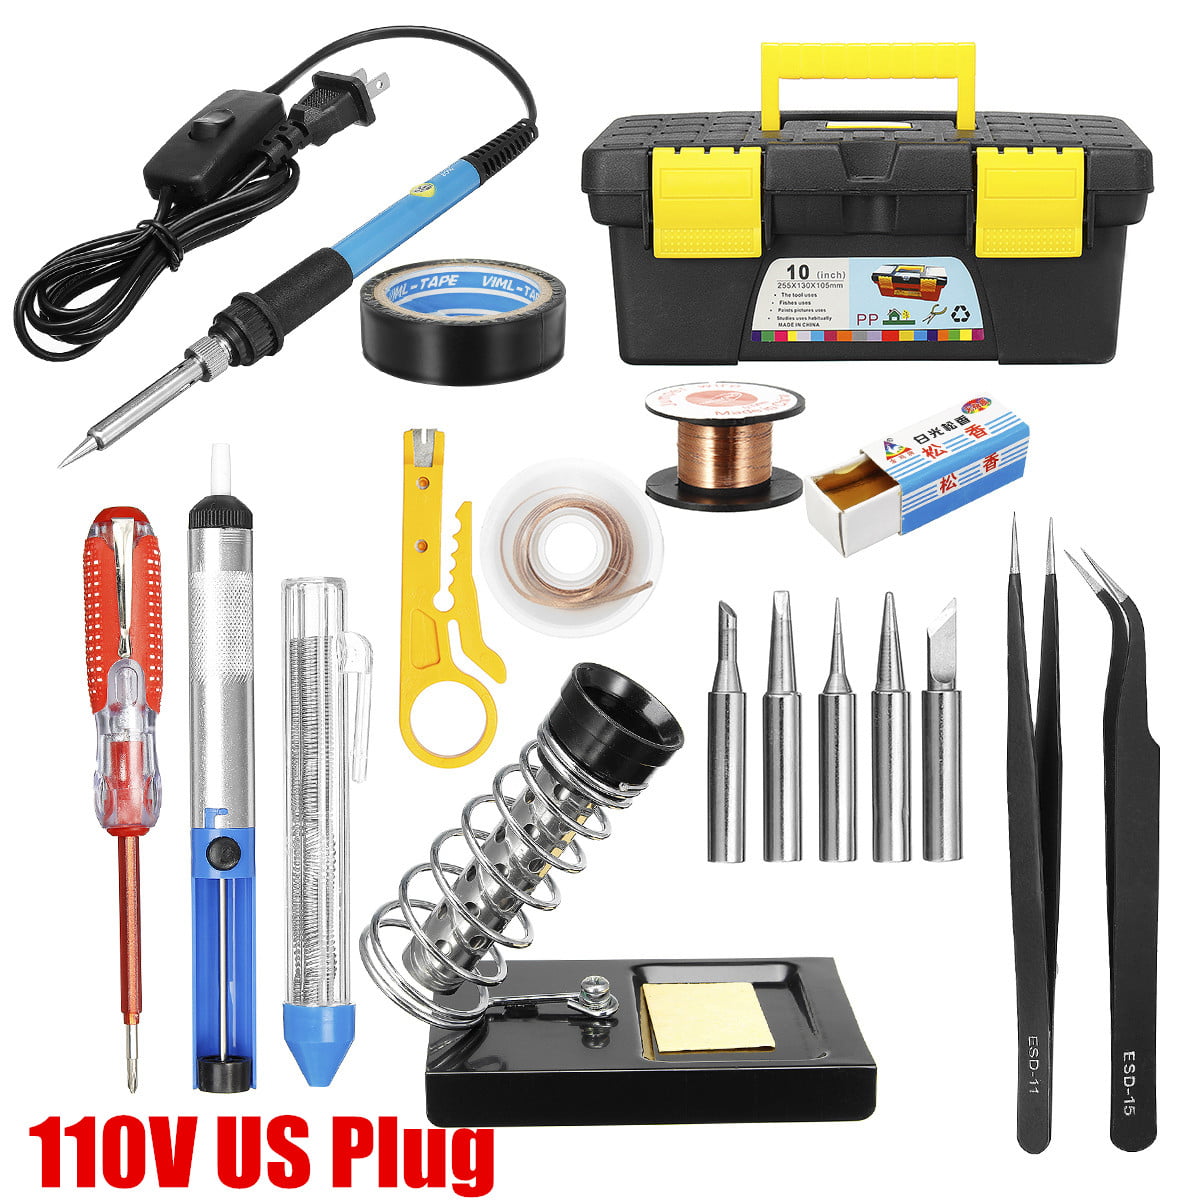 19 in 1 Comprehensive Soldering Iron Set for Electronic Board Repairing Wood Burning Crafting UK Plug 60W Adjustable Temperature Soldering Iron Welding Kit Electric Soldering Iron Welding Tool Kit